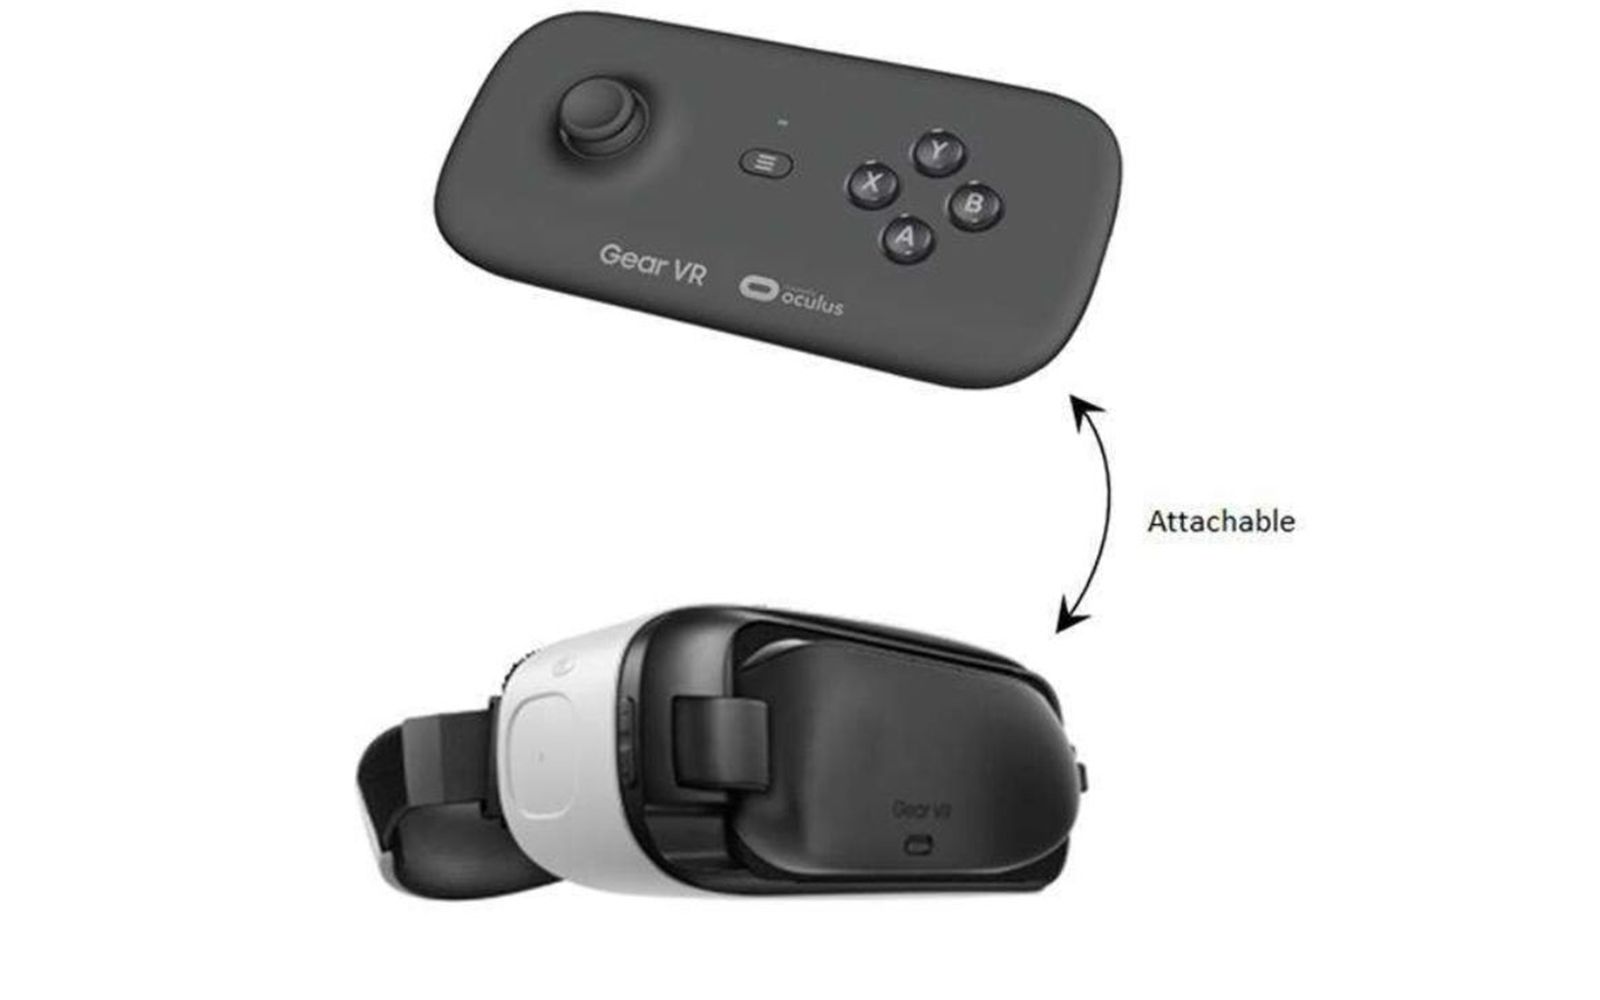 samsung gear vr getting its own gamepad clips into headset when not in use image 1